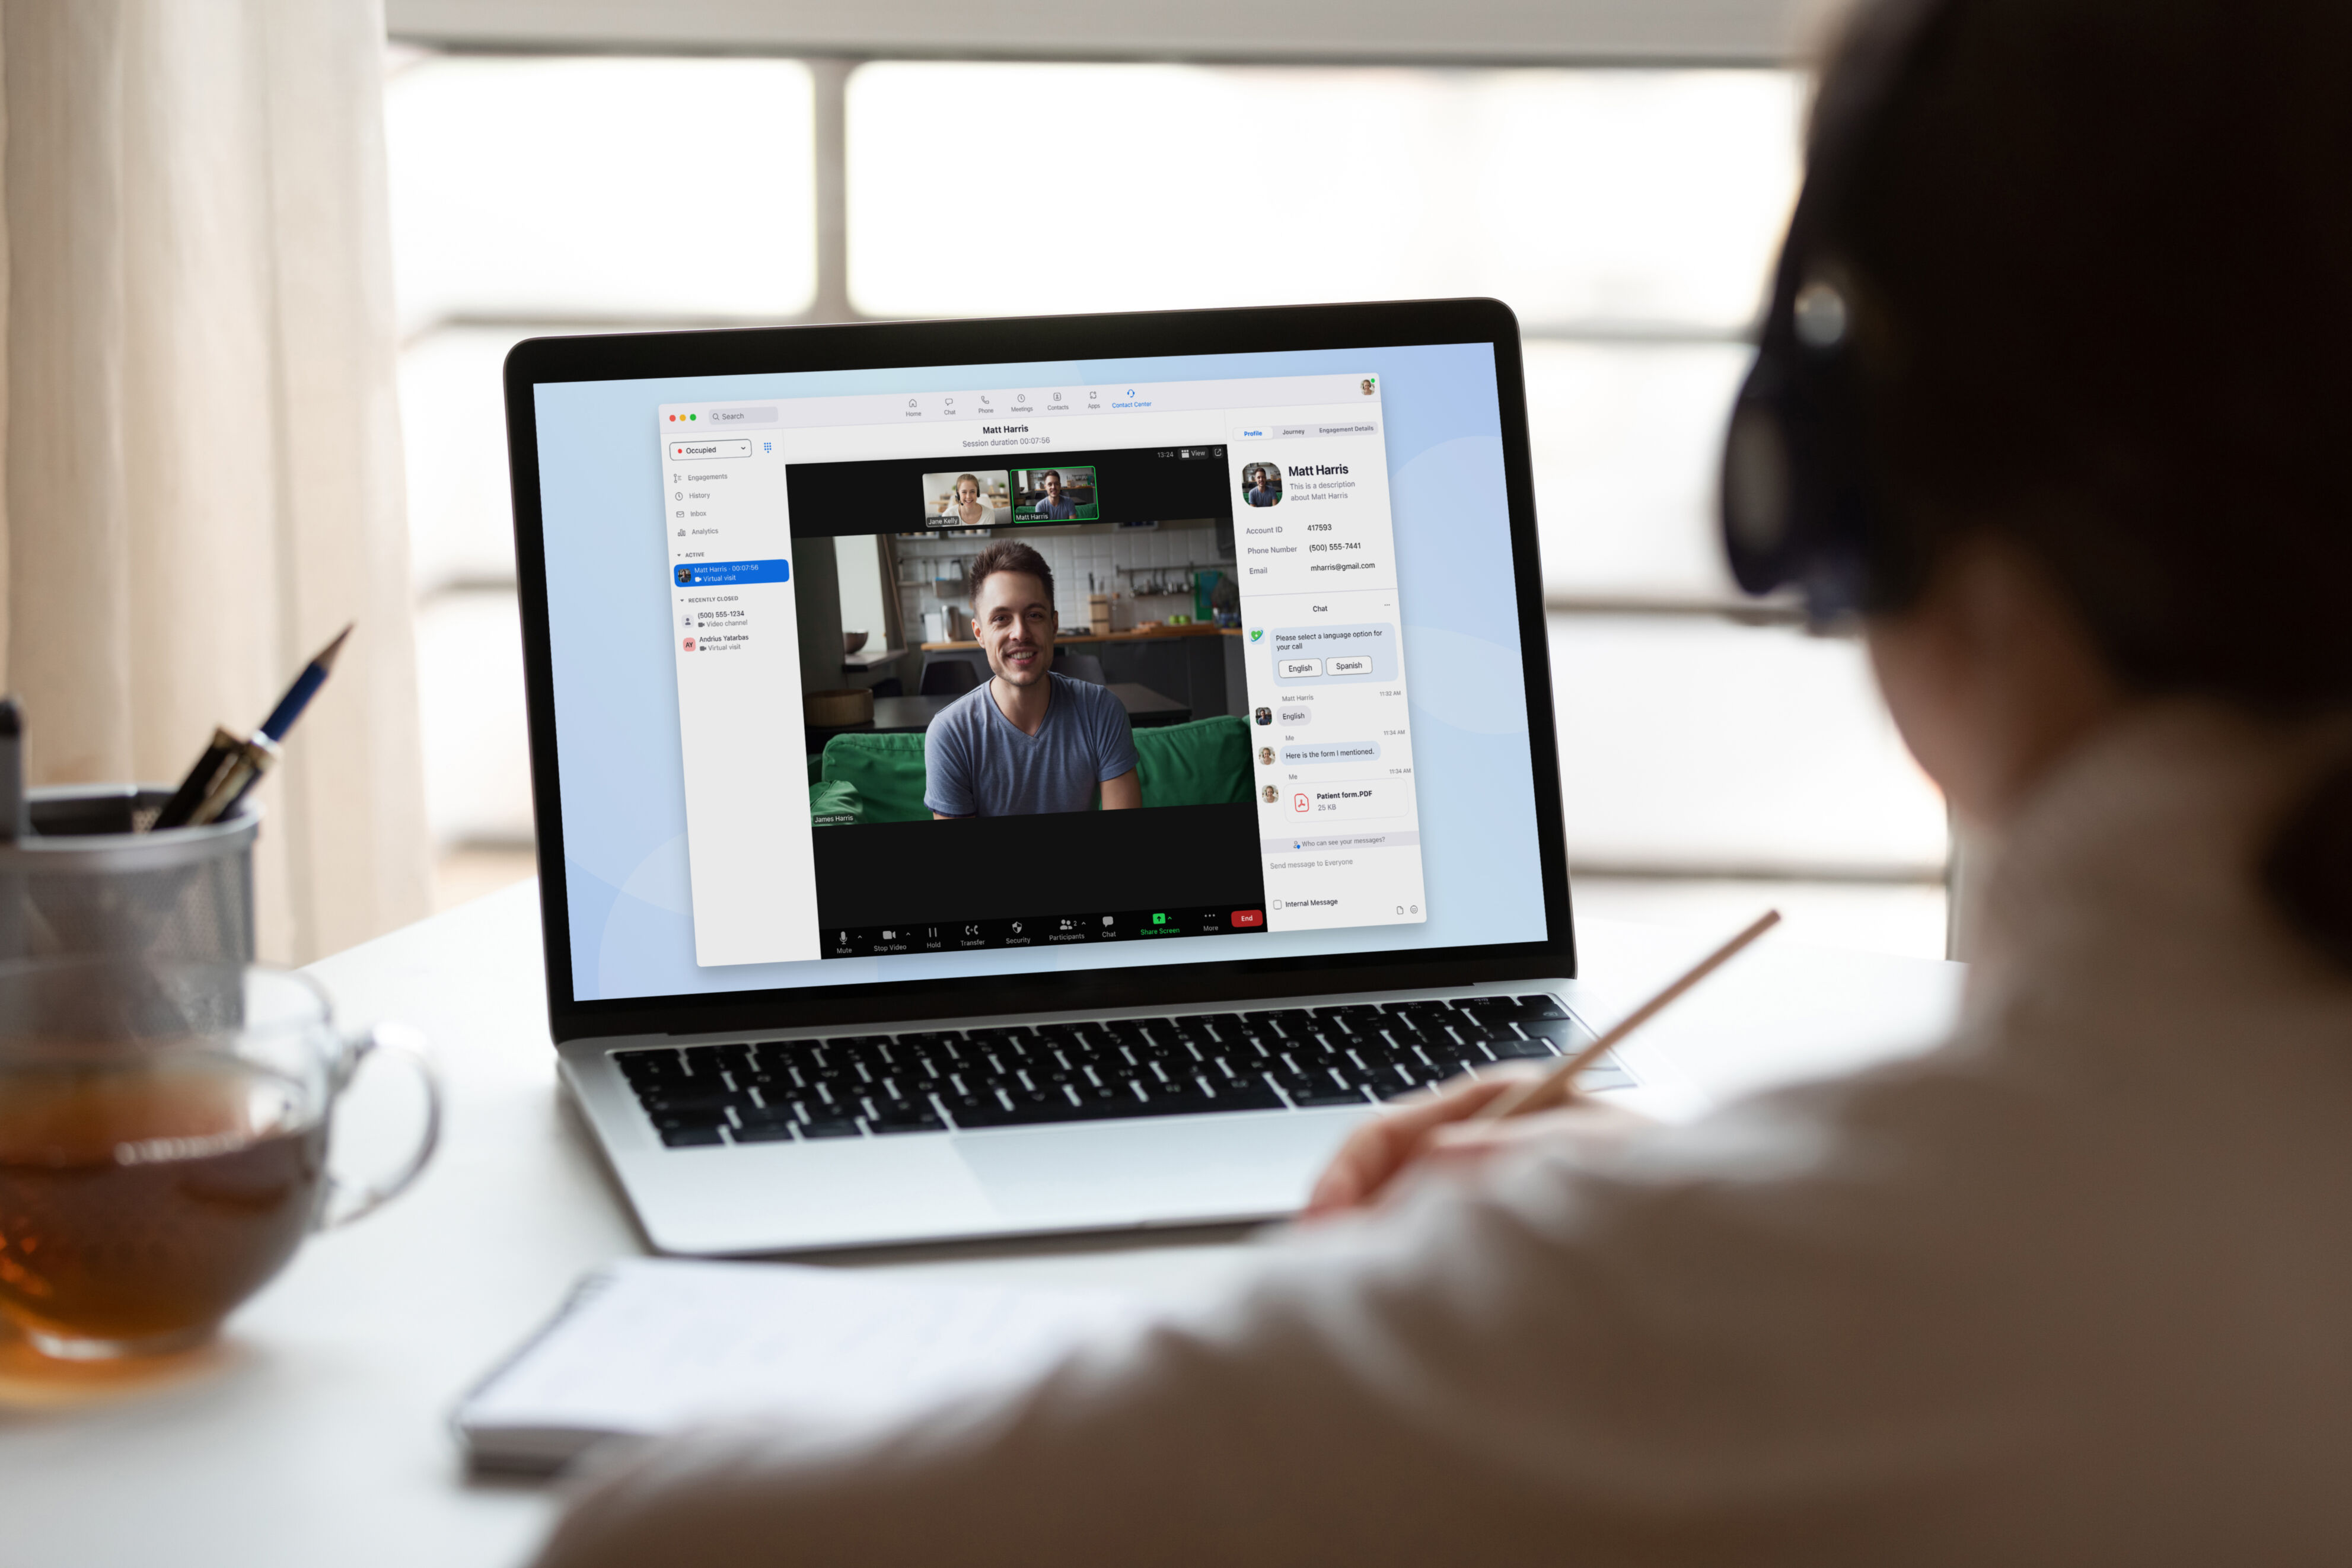 25 Strategies to Engage Students on Your Next Zoom Meeting